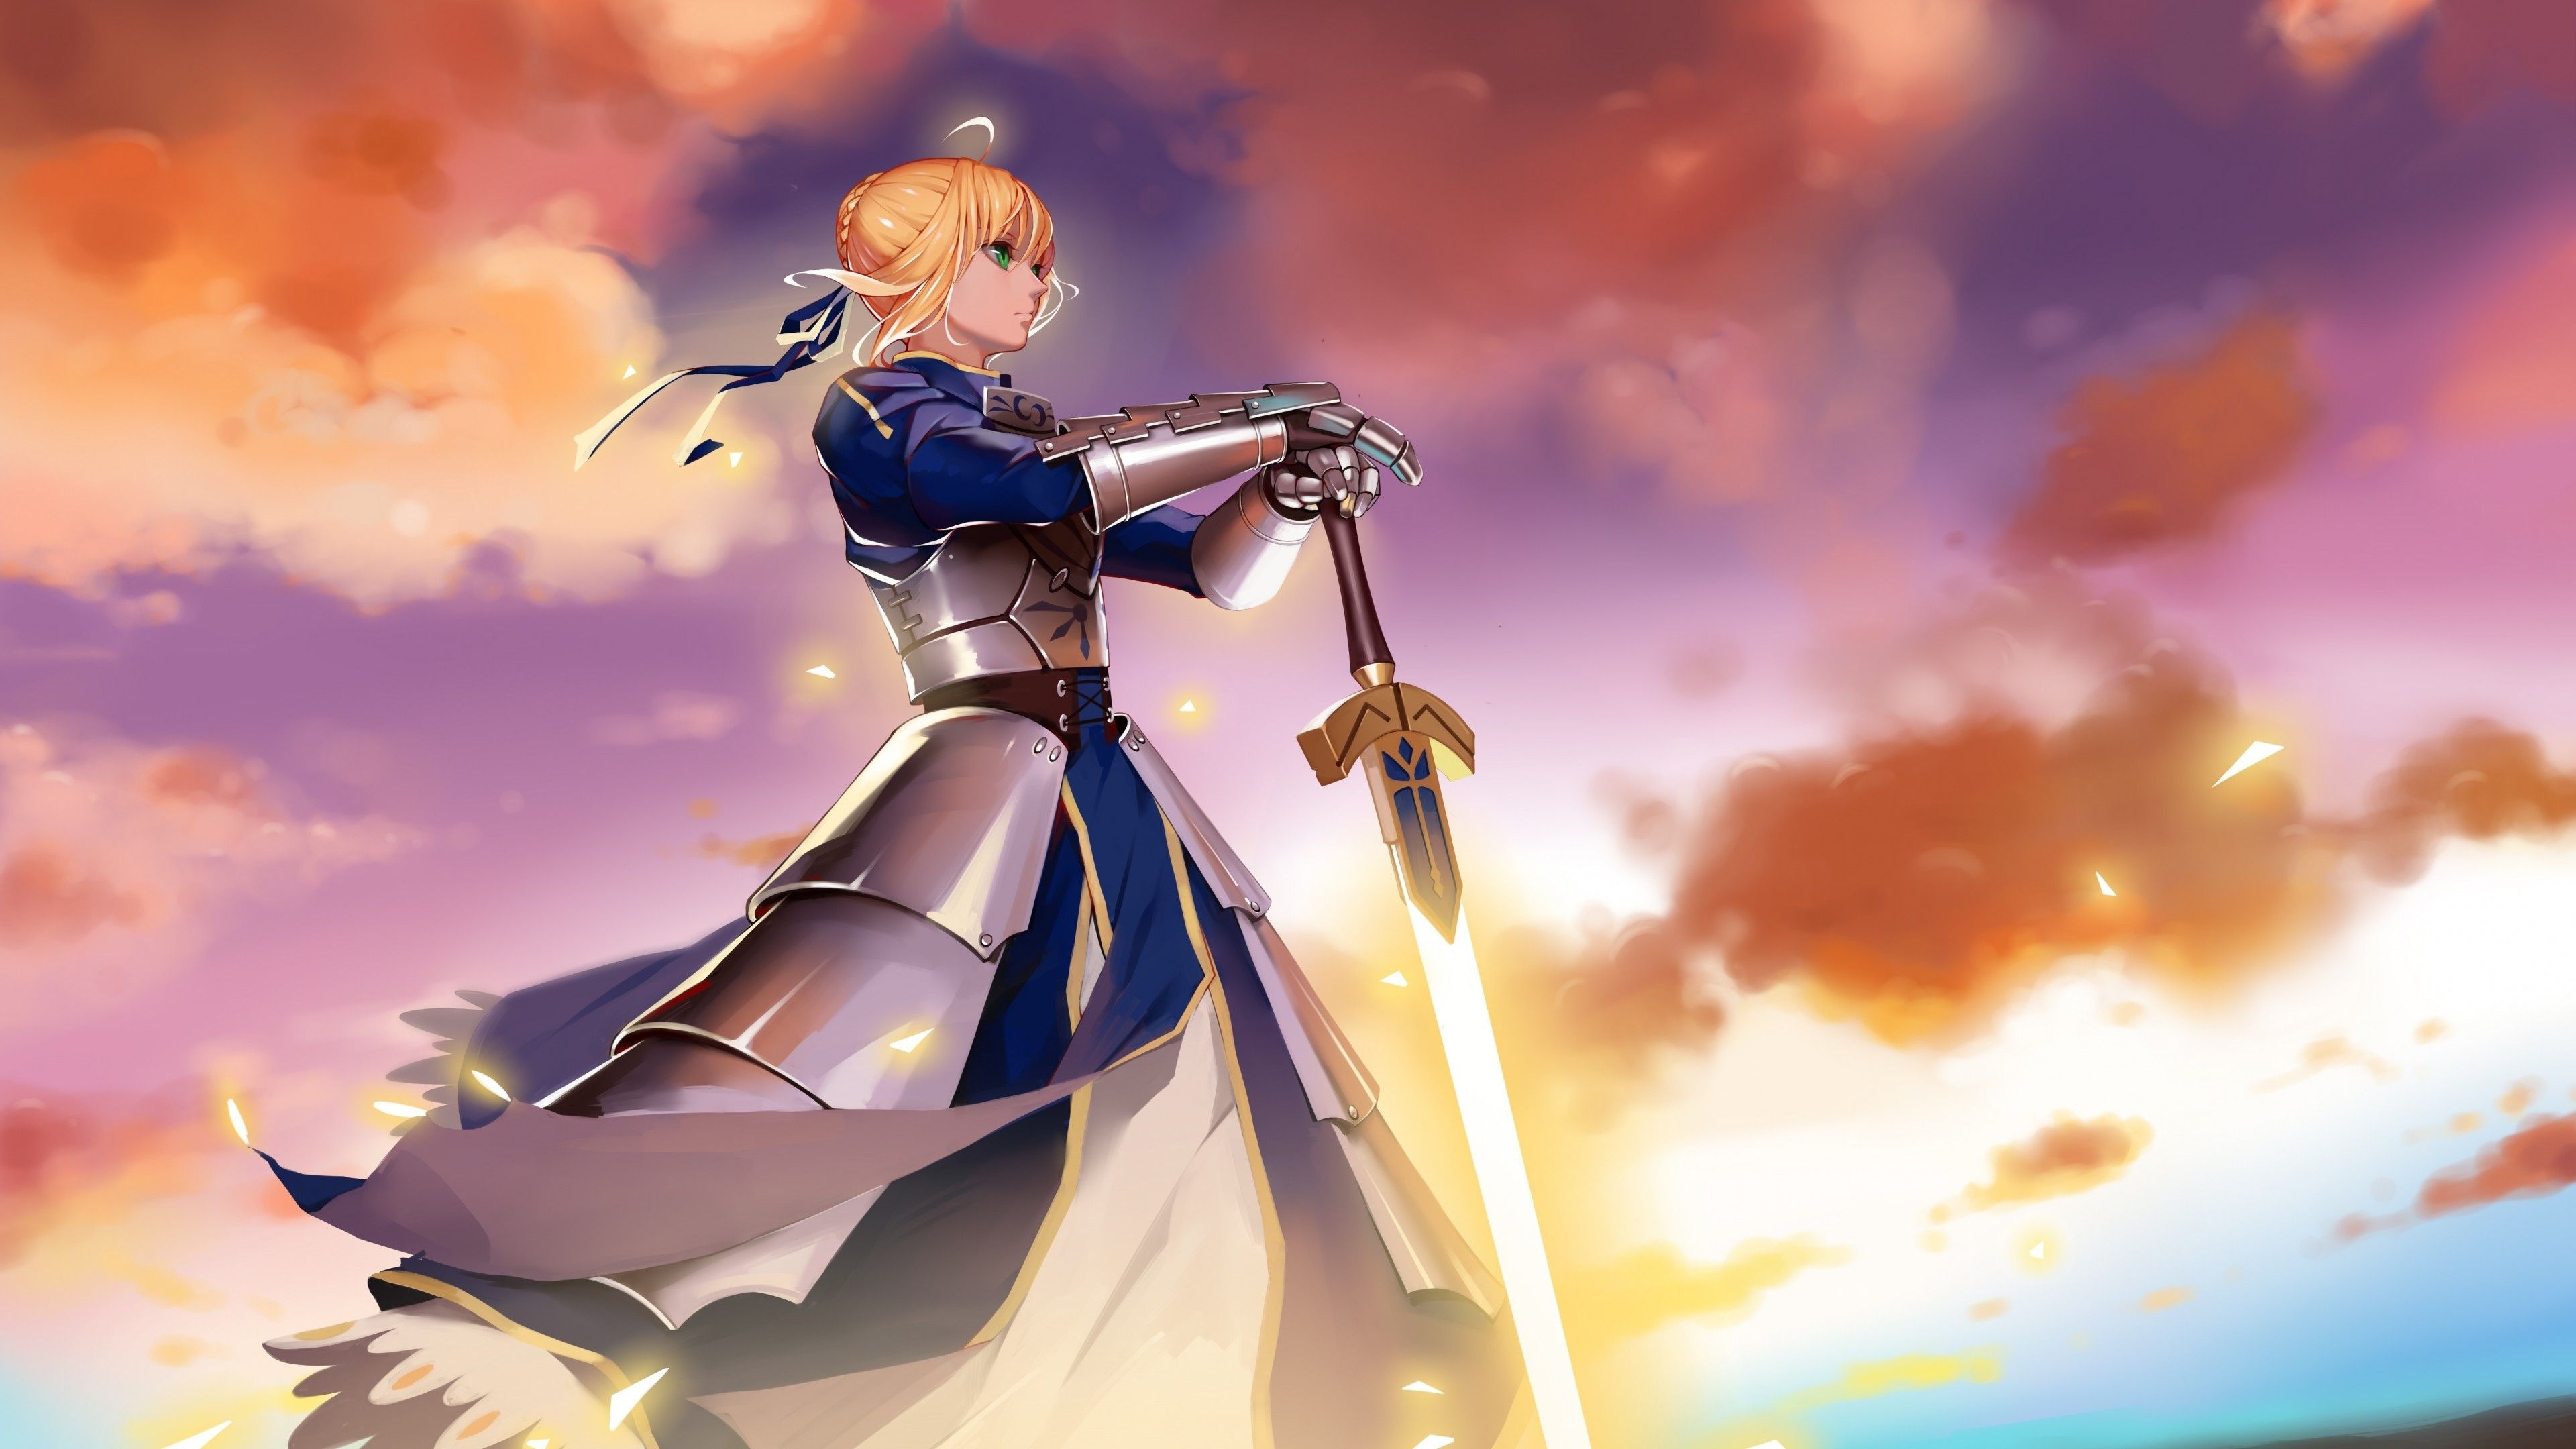 Fate/stay night: Unlimited Blade Works, Wallpapers, Backgrounds, 3840x2160 4K Desktop